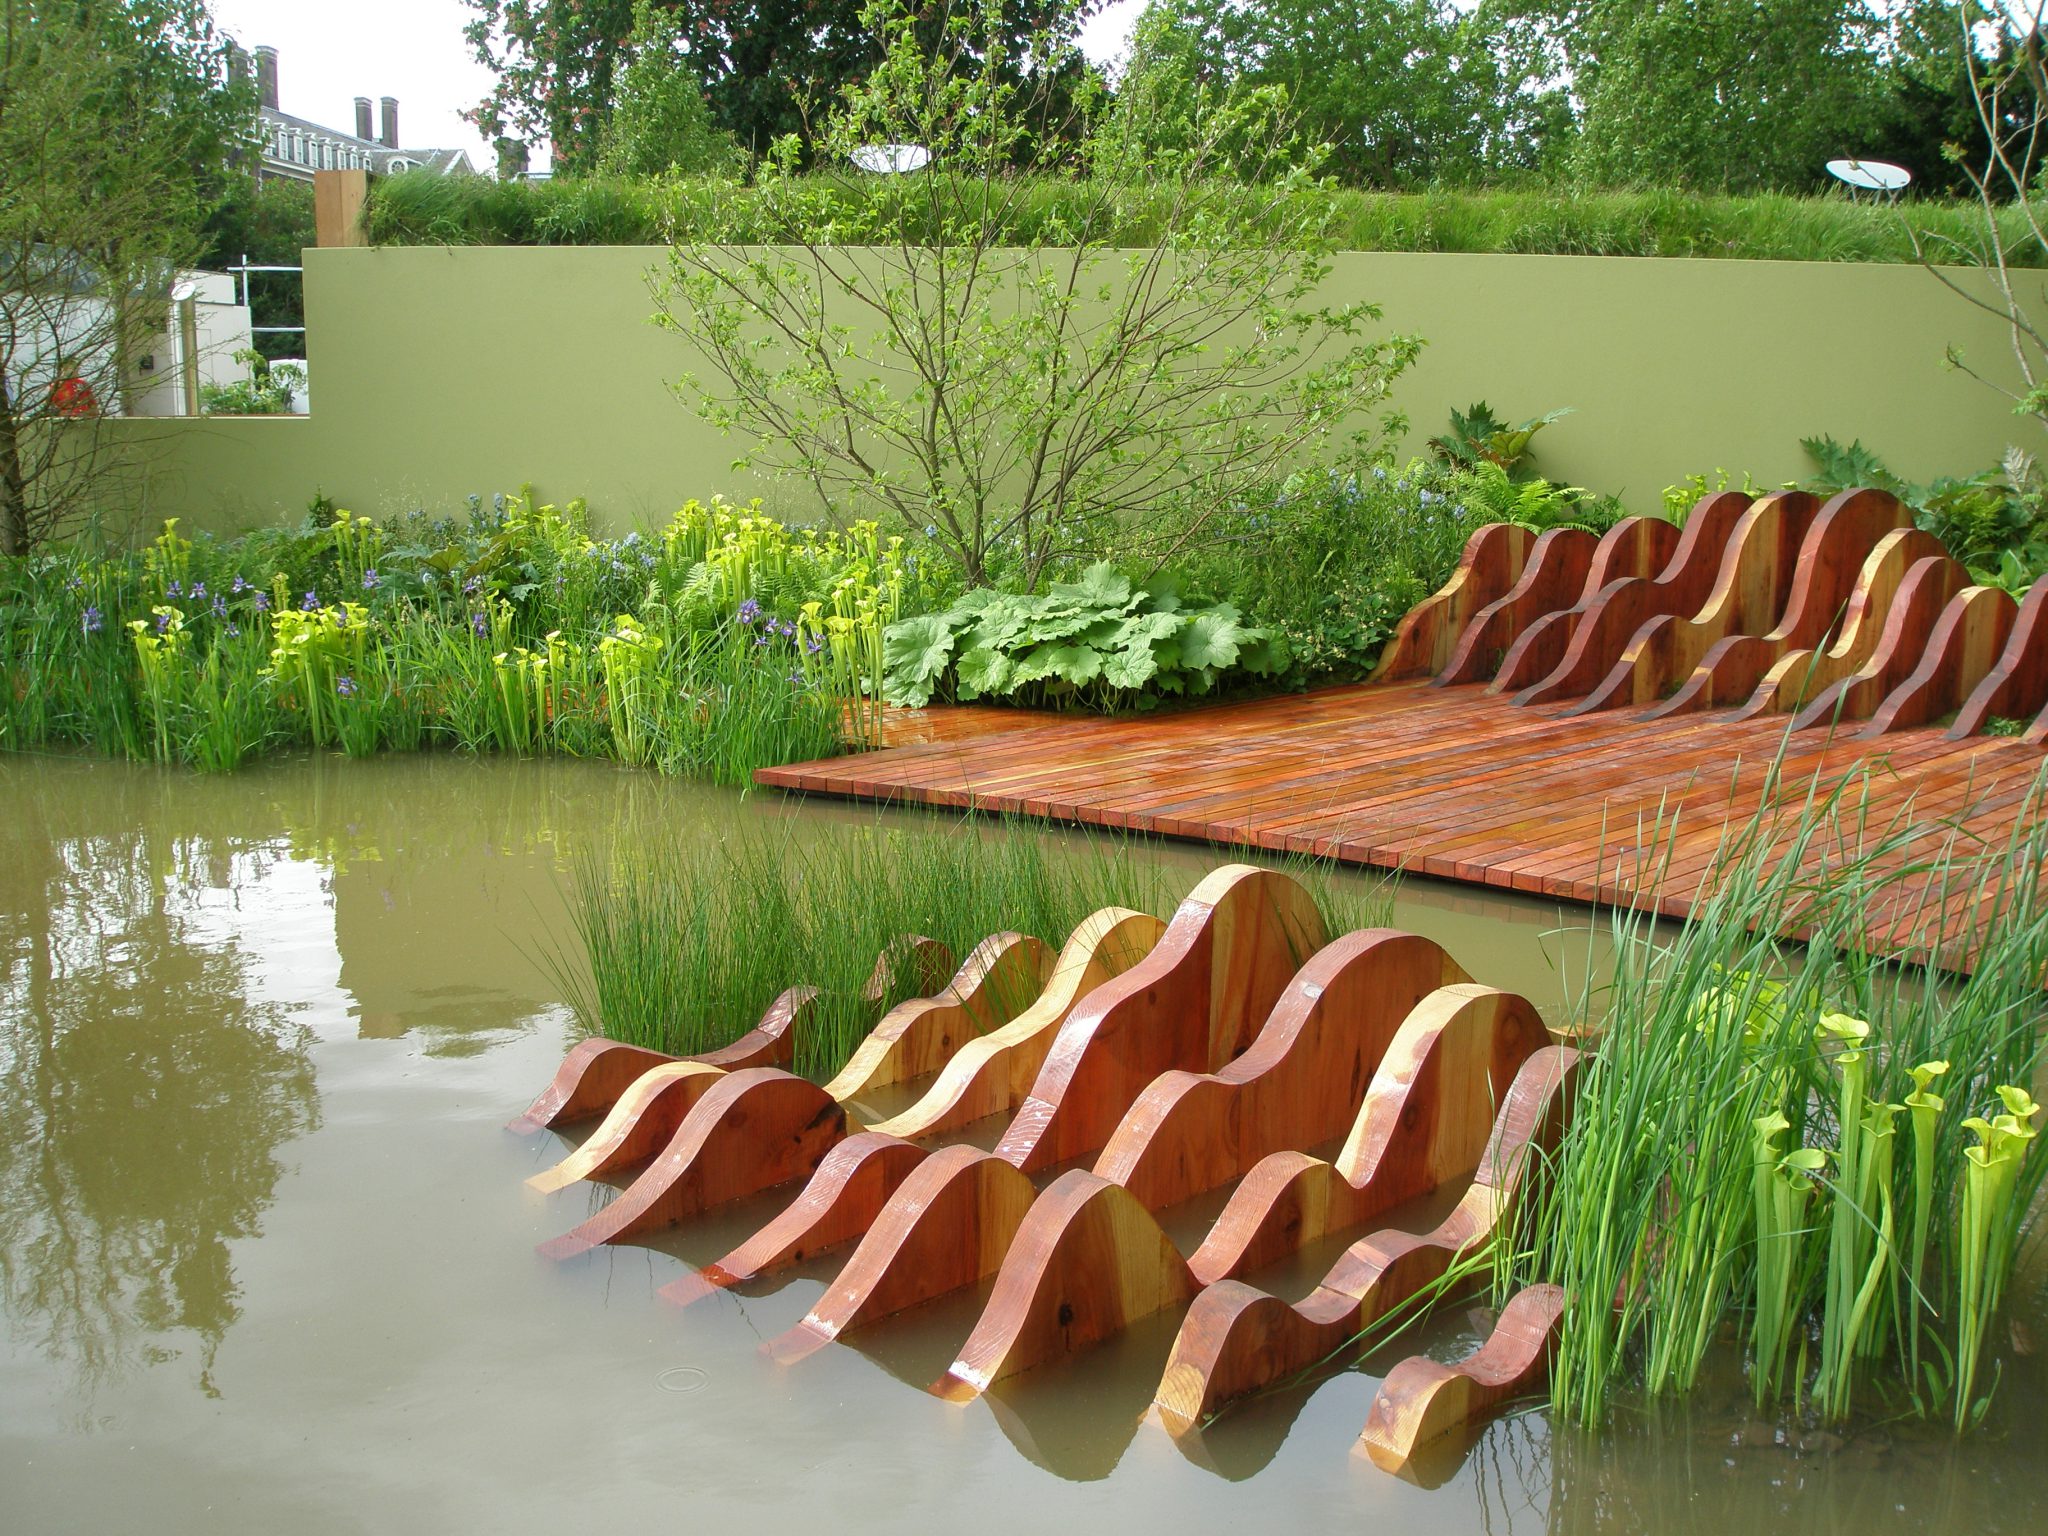 At the Chelsea Flower Show in May 2009